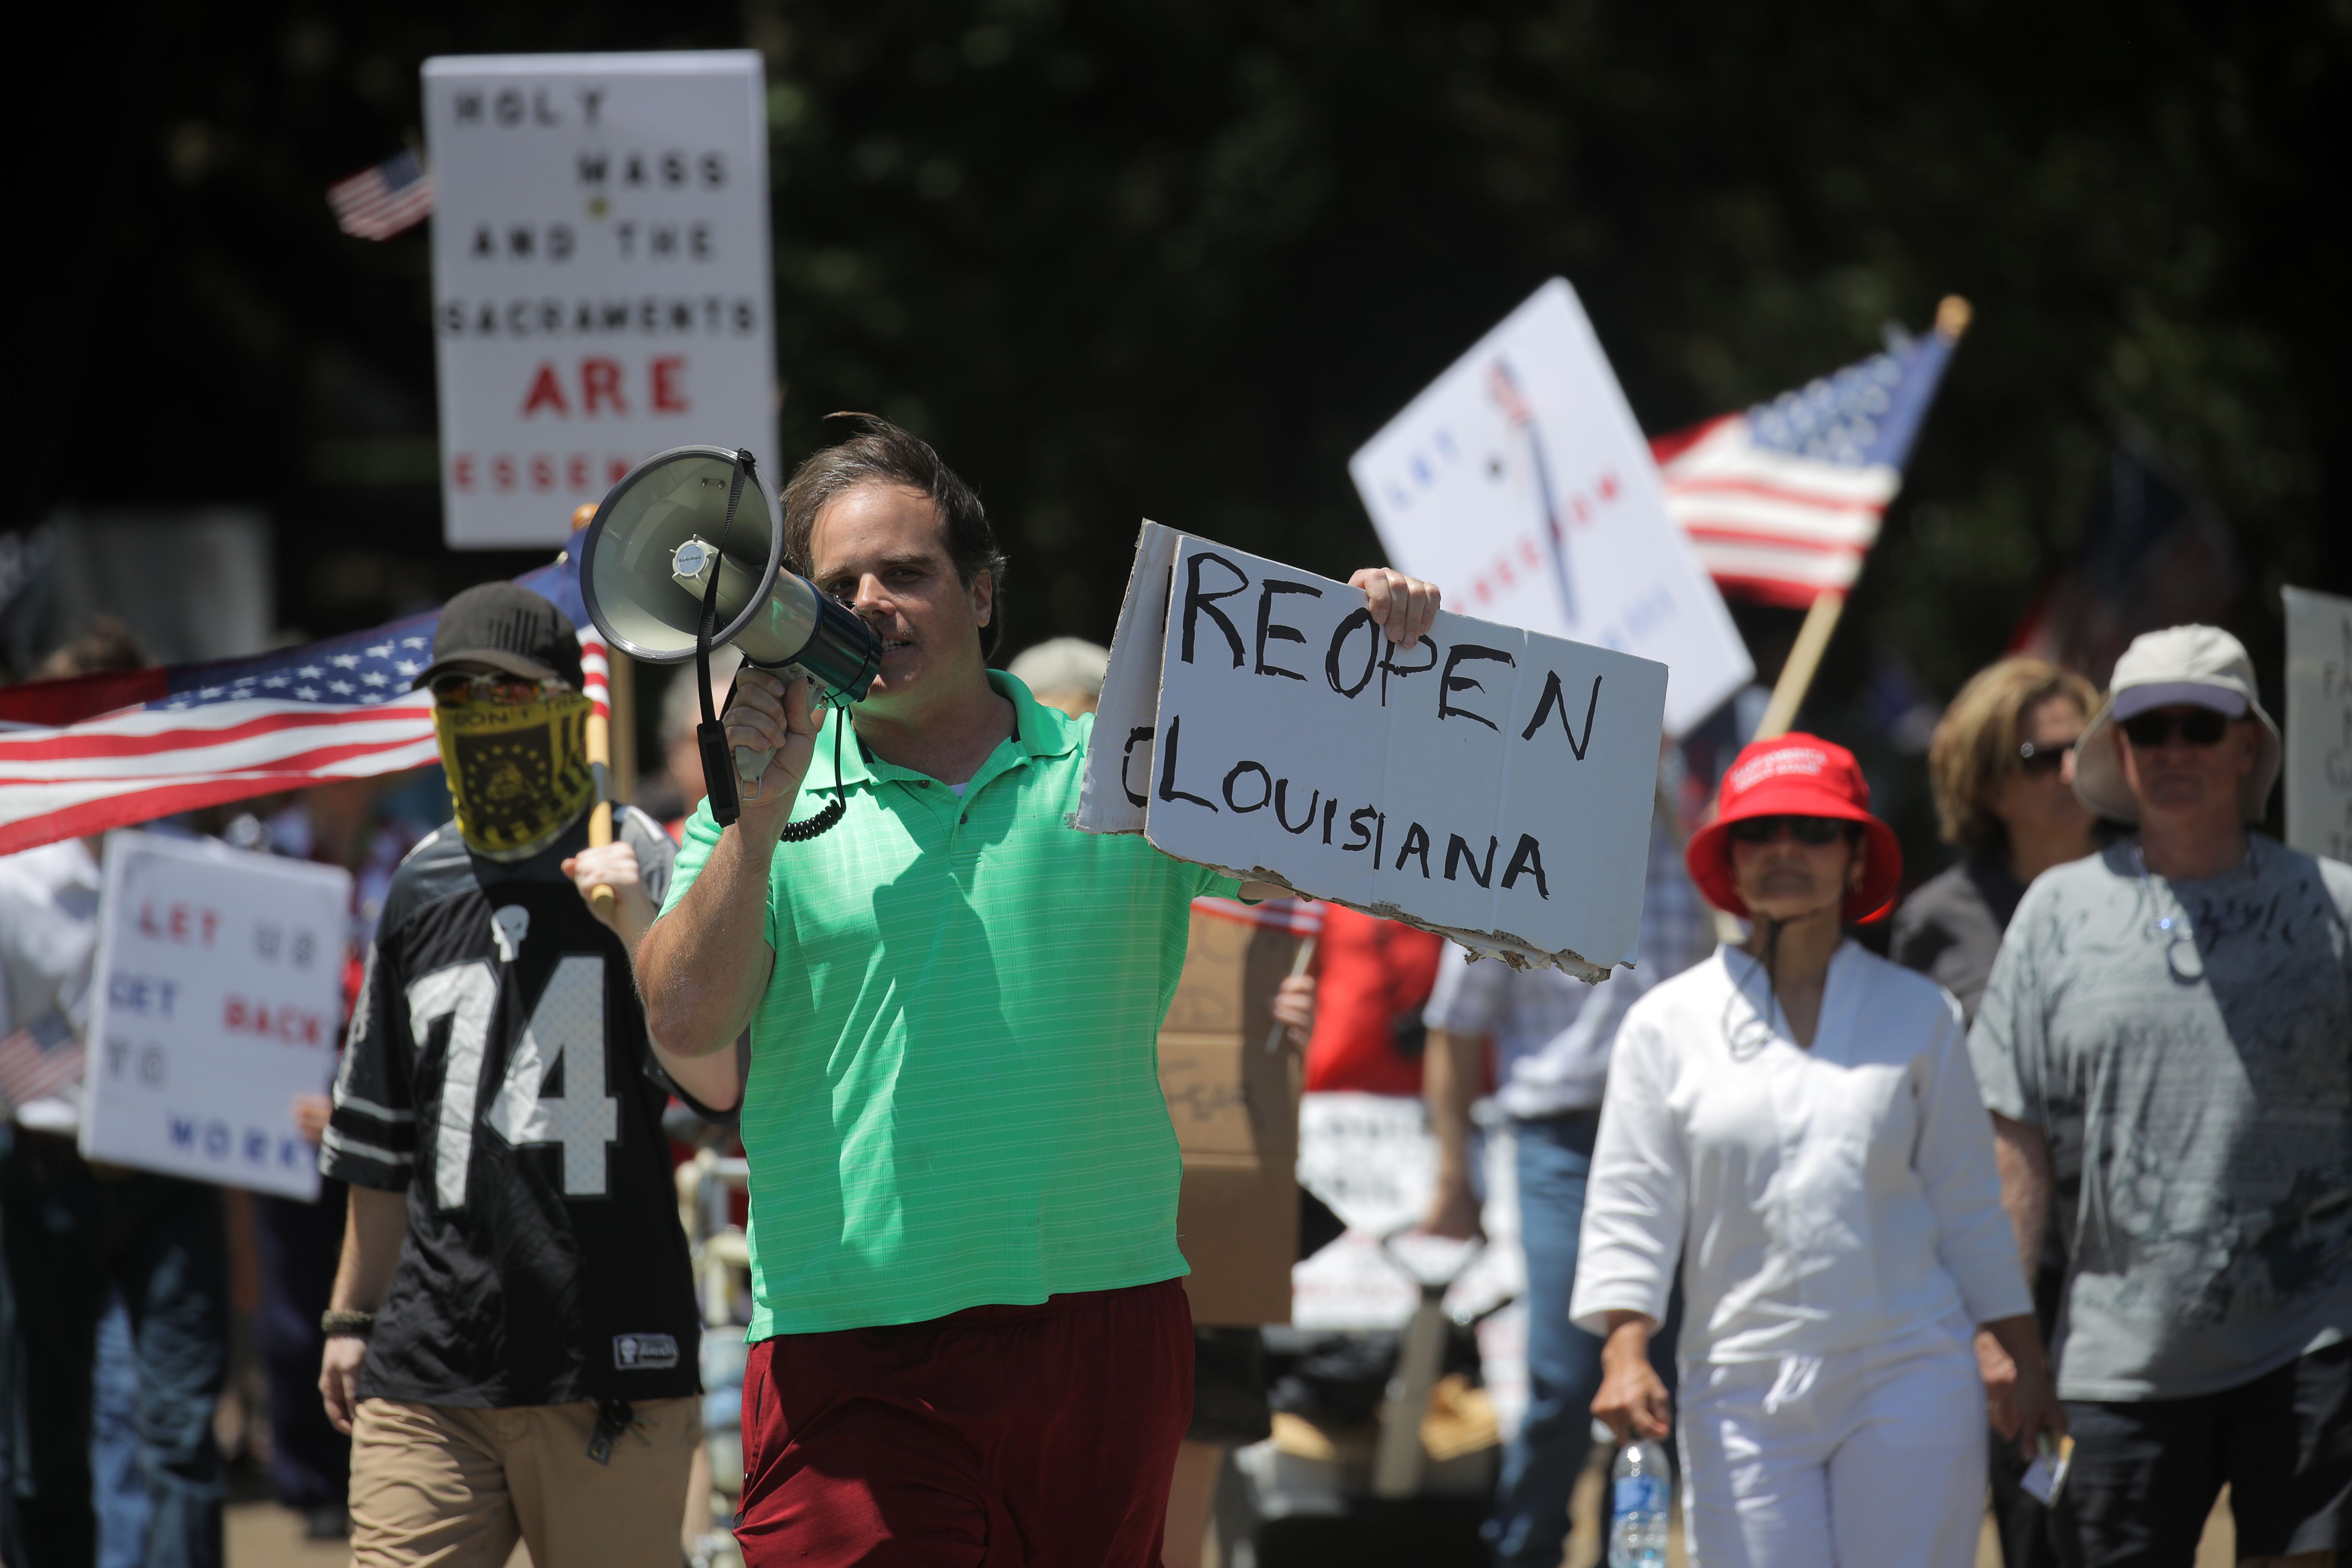 In this image, a man holds a cardboard sign that reads "reopen louisiana" and a megaphone